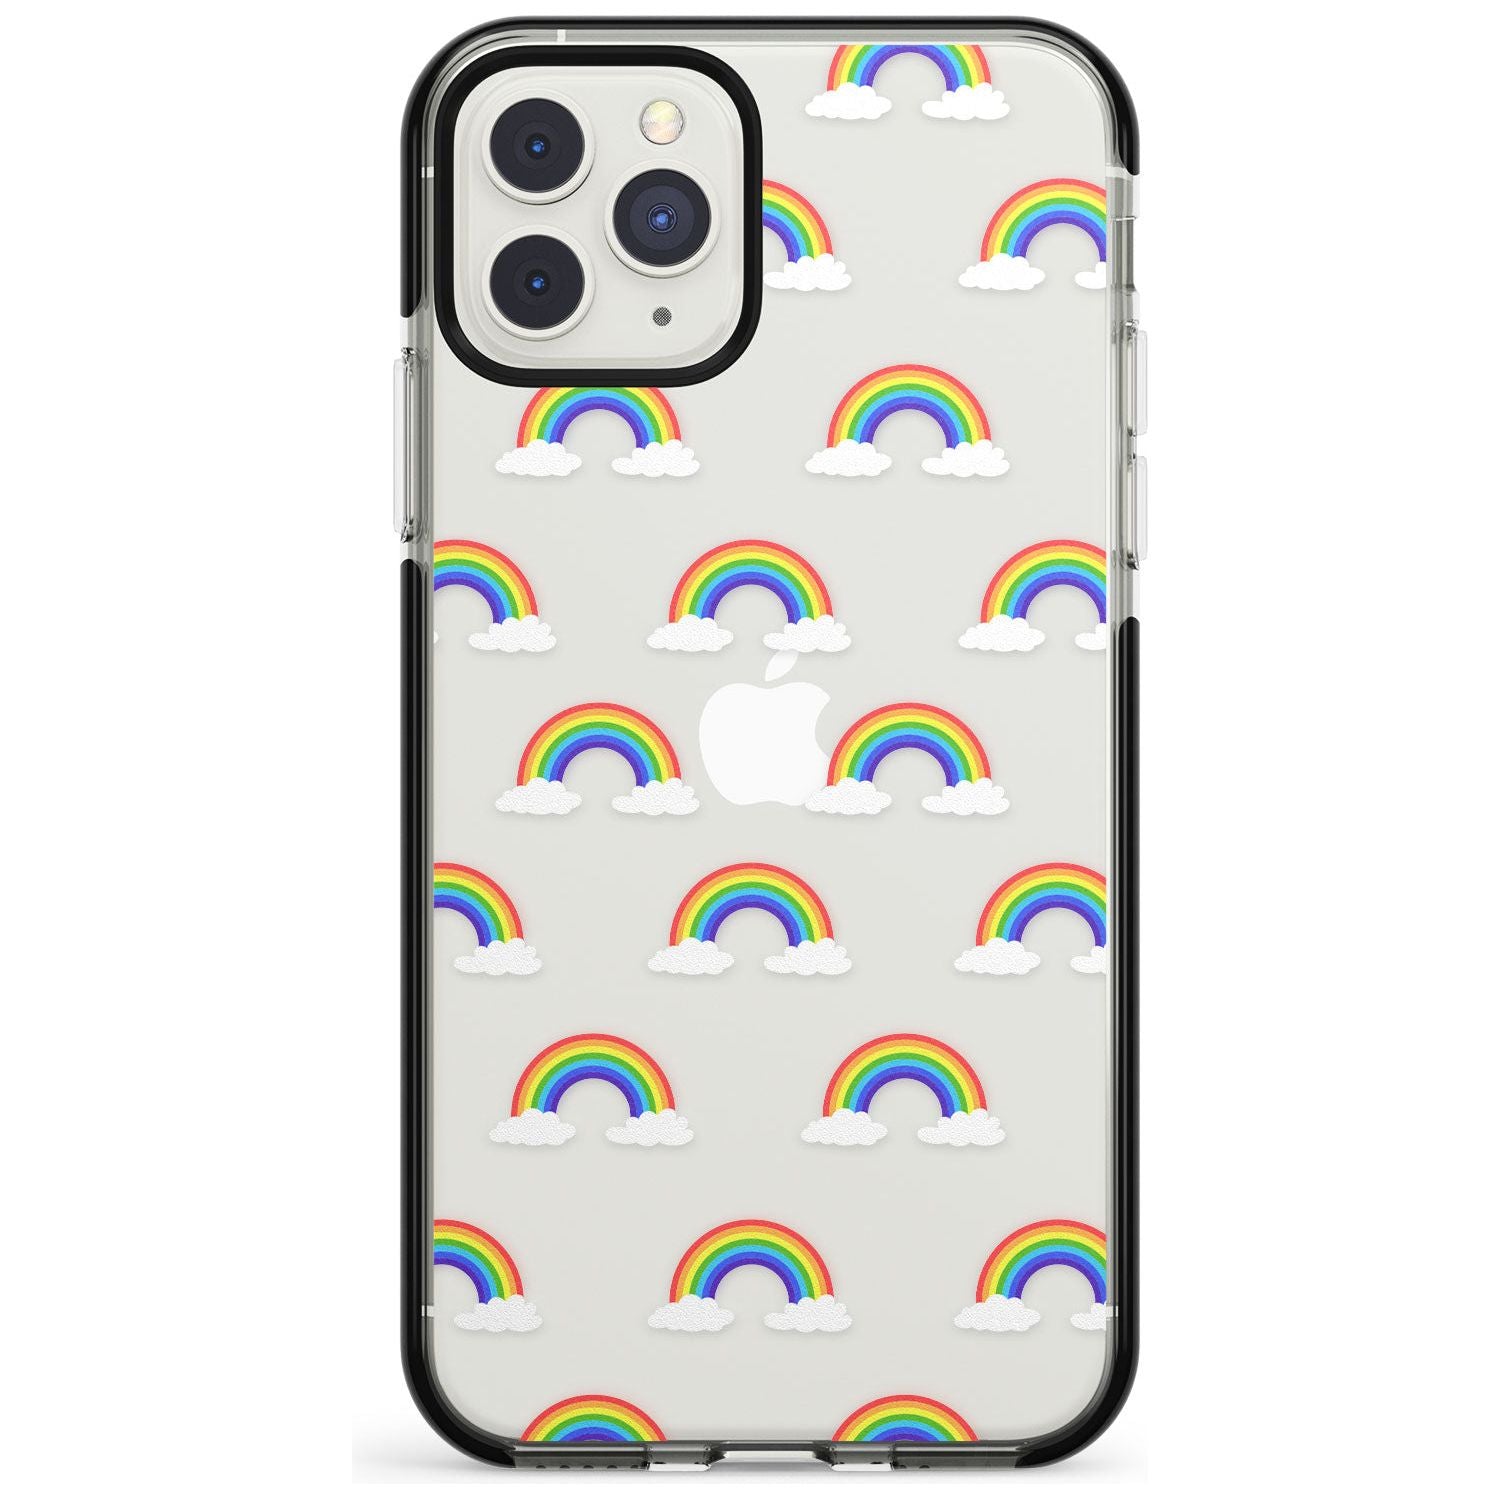 Rainbow of possibilities Black Impact Phone Case for iPhone 11 Pro Max